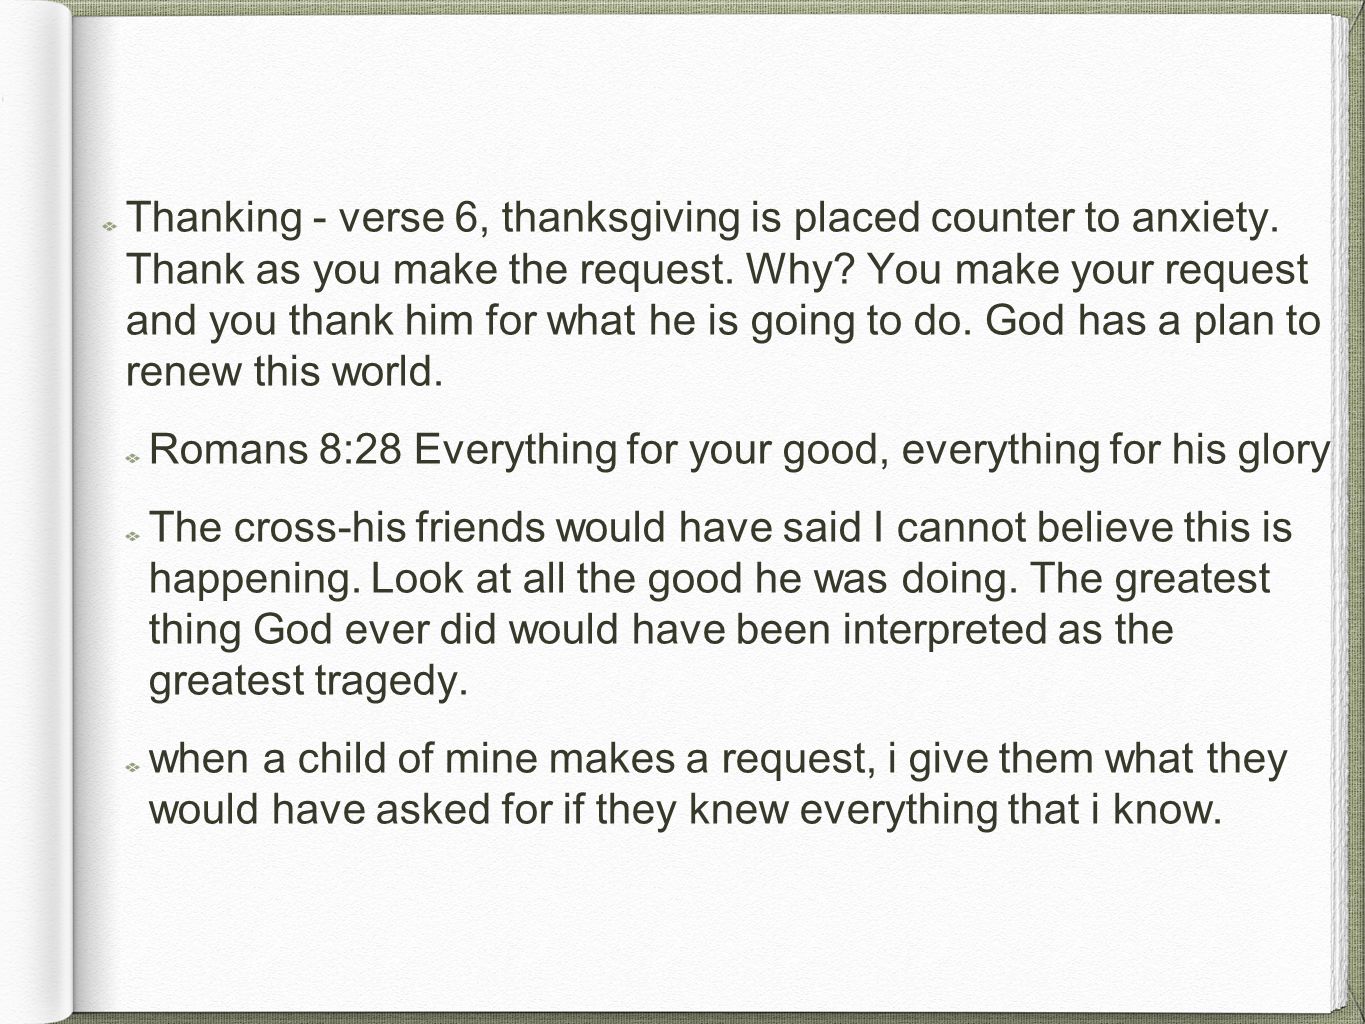 Thanking - verse 6, thanksgiving is placed counter to anxiety.